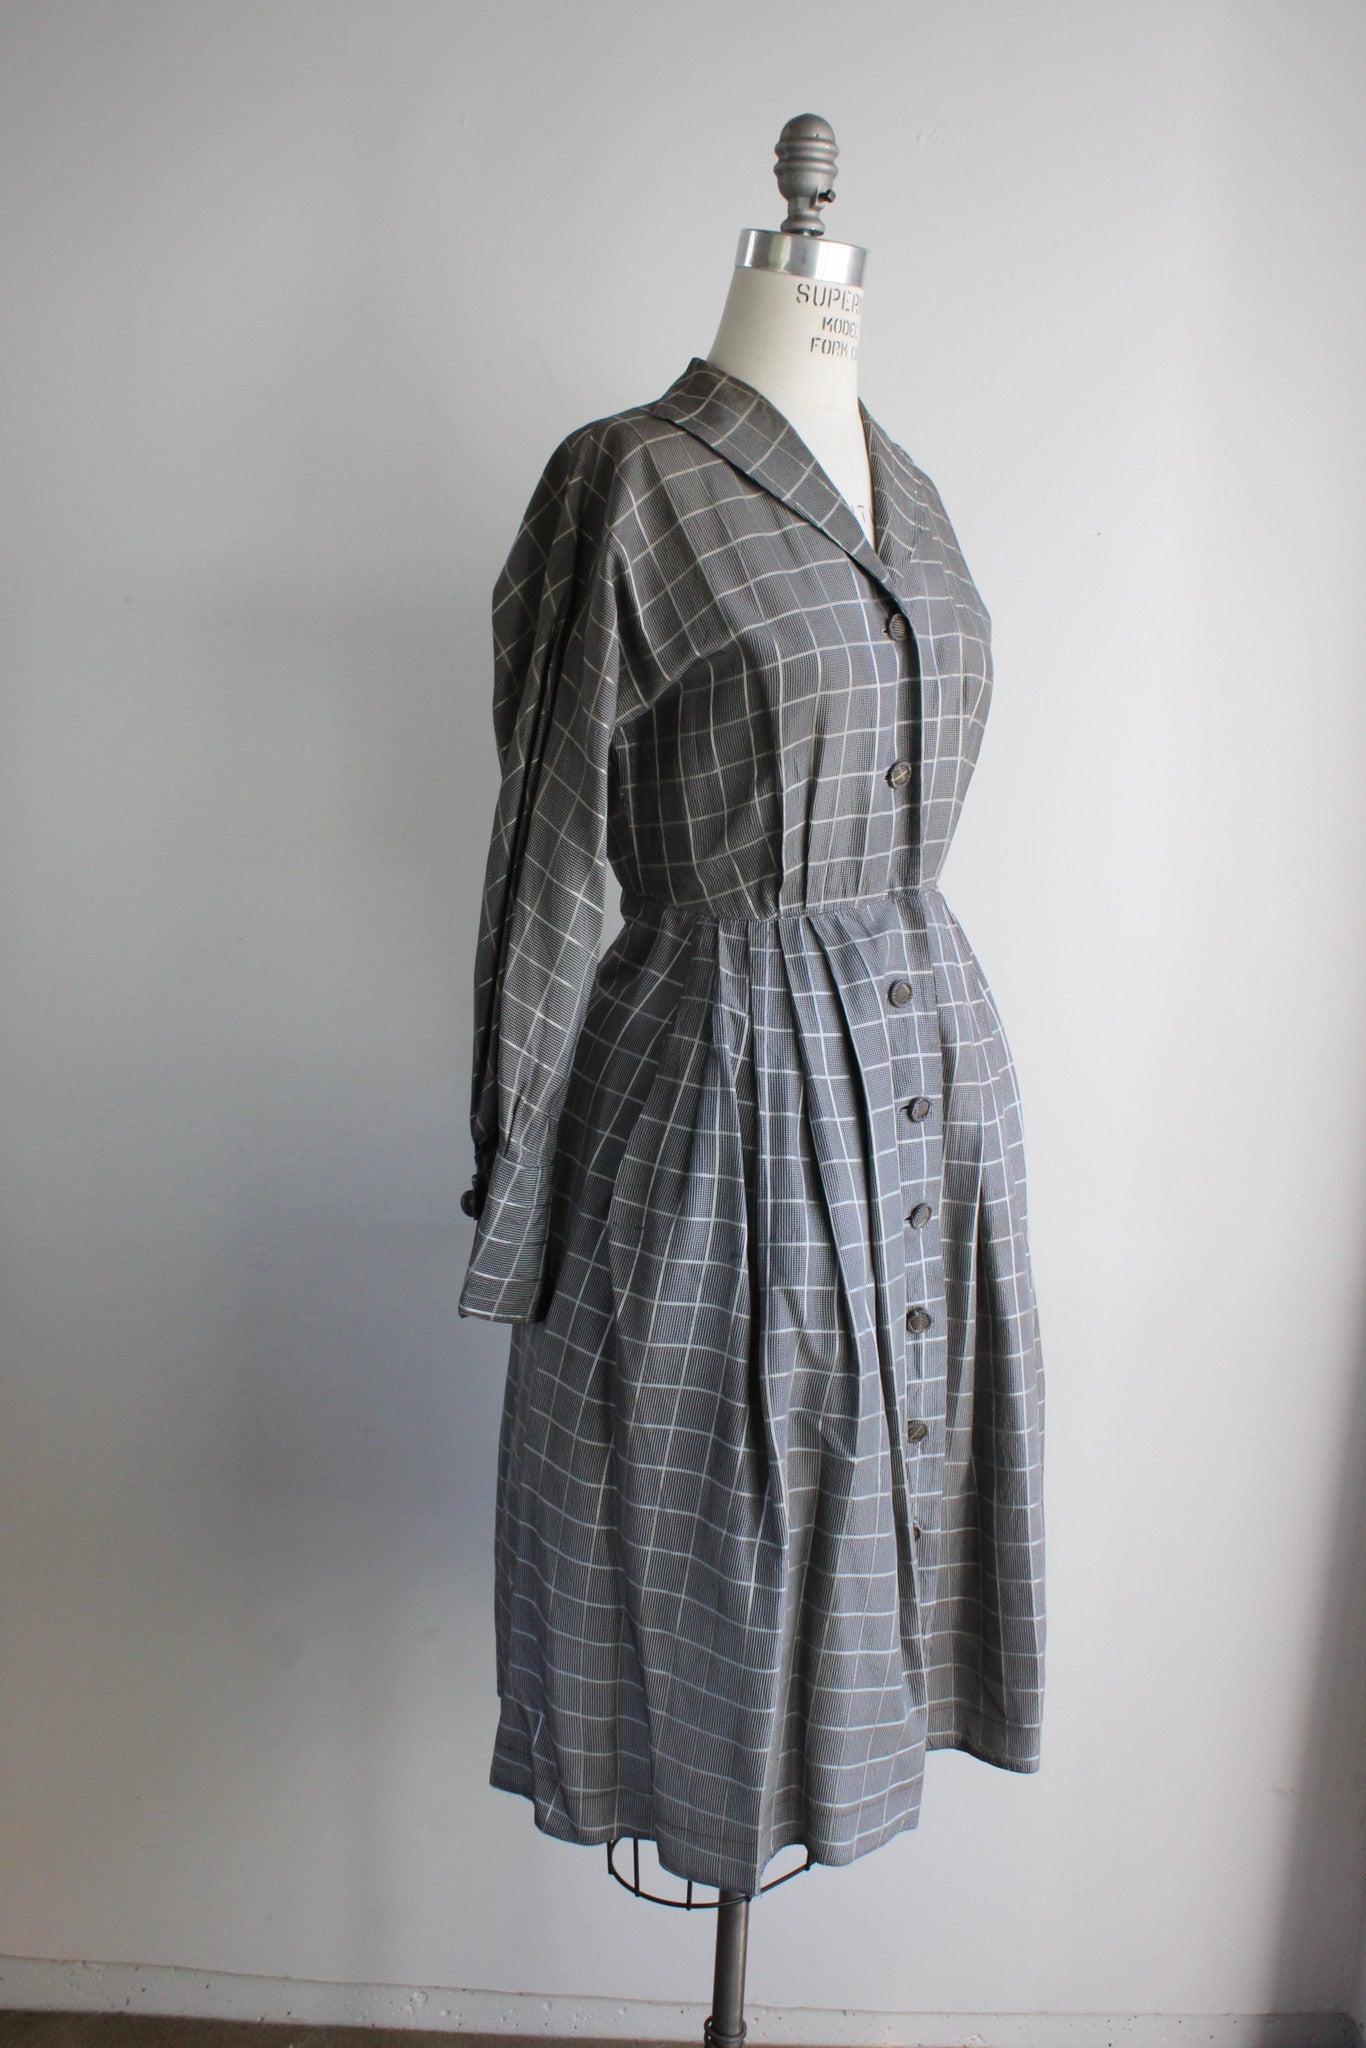 Vintage 1950s Shirtwaist Checked Dress With Pockets, Nelson-Caine